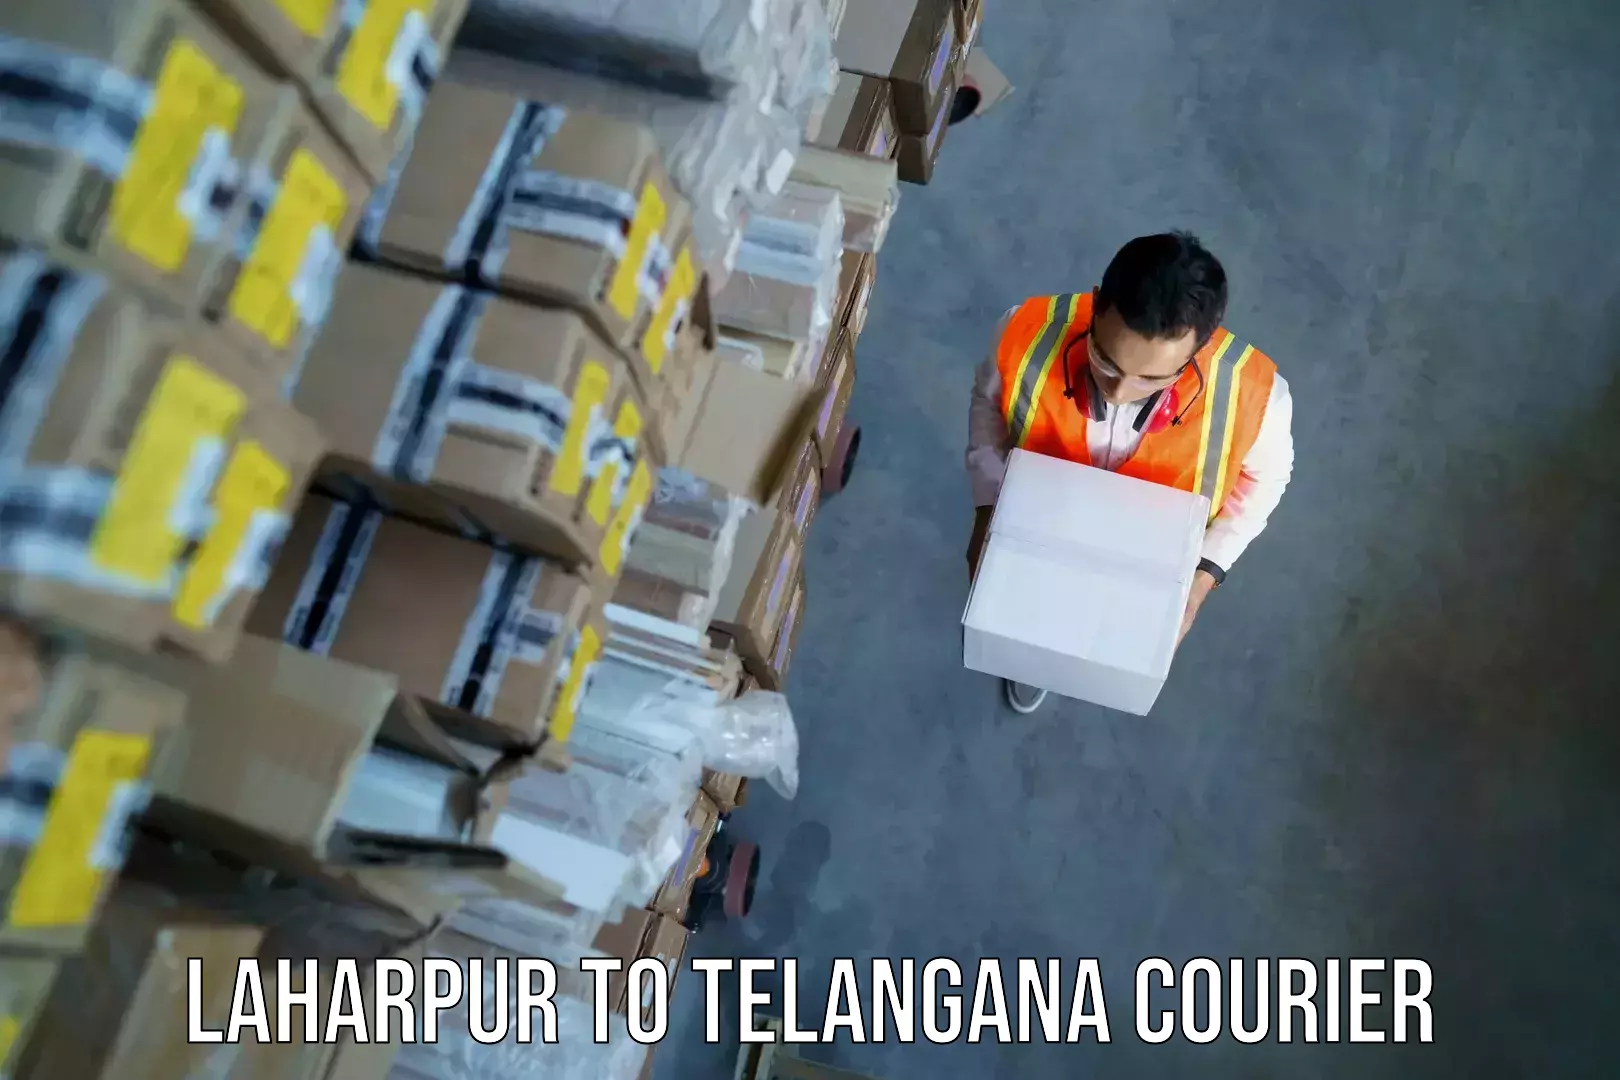 Baggage delivery technology Laharpur to Marikal